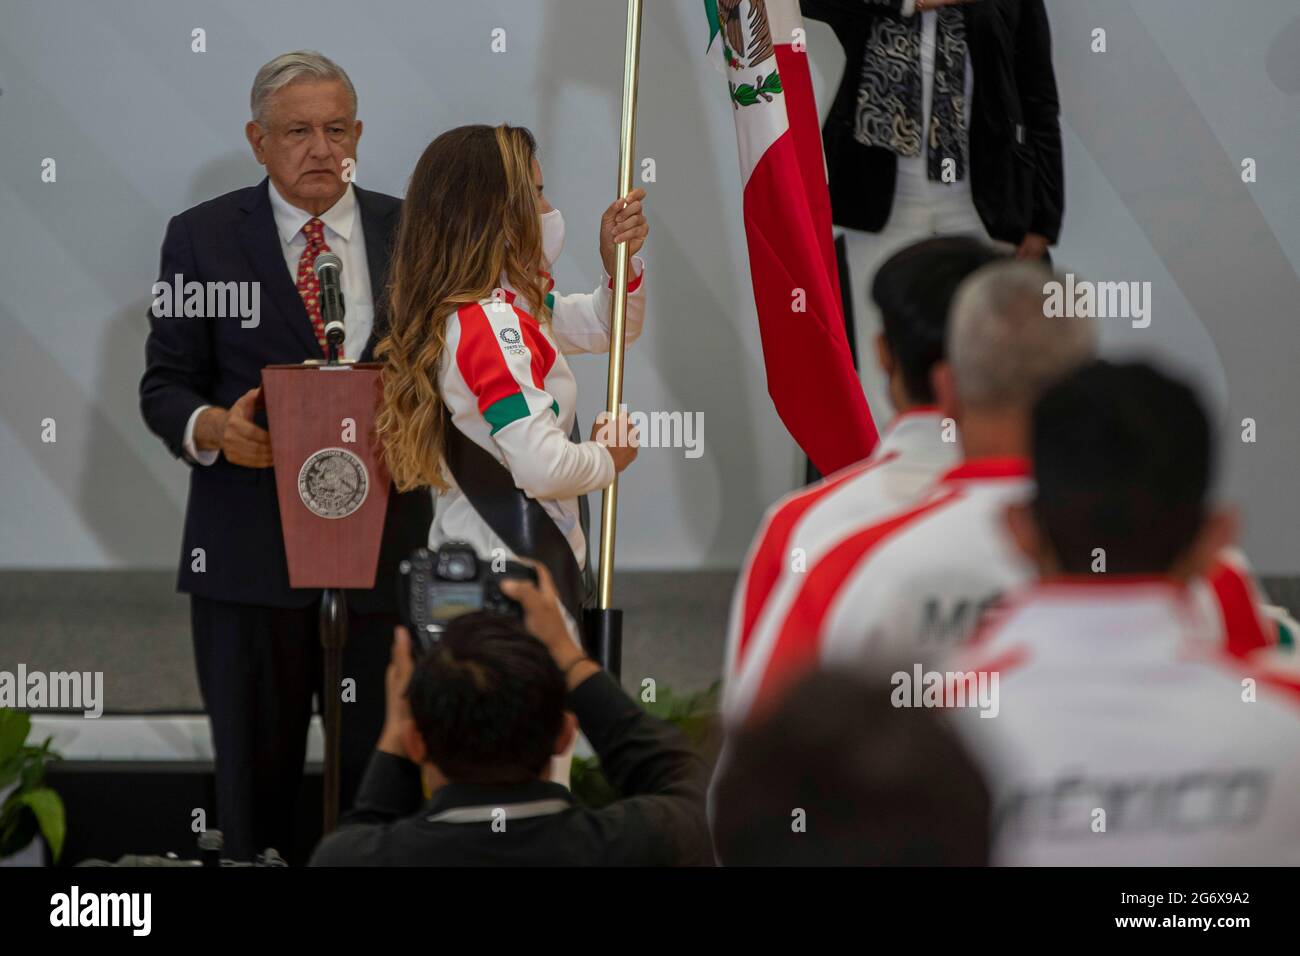 MEXICO CITY, MEXICO JULY 5: Golfer Gabriela Lopez holds the Mexican flag white the Mexico’s President, Andres Manuel Lopez Obrador  speaks  during the  Ceremony of Flagging of the athletes who will represent Mexico towards the XXXII Olympic Games, Tokyo 2021 at National Center for the Development of Sports Talents and High Performance (CNAR) on July 5, 2021 in Mexico City, Mexico. Credit: Ricardo Flores/Eyepix Group/The Photo Access Stock Photo